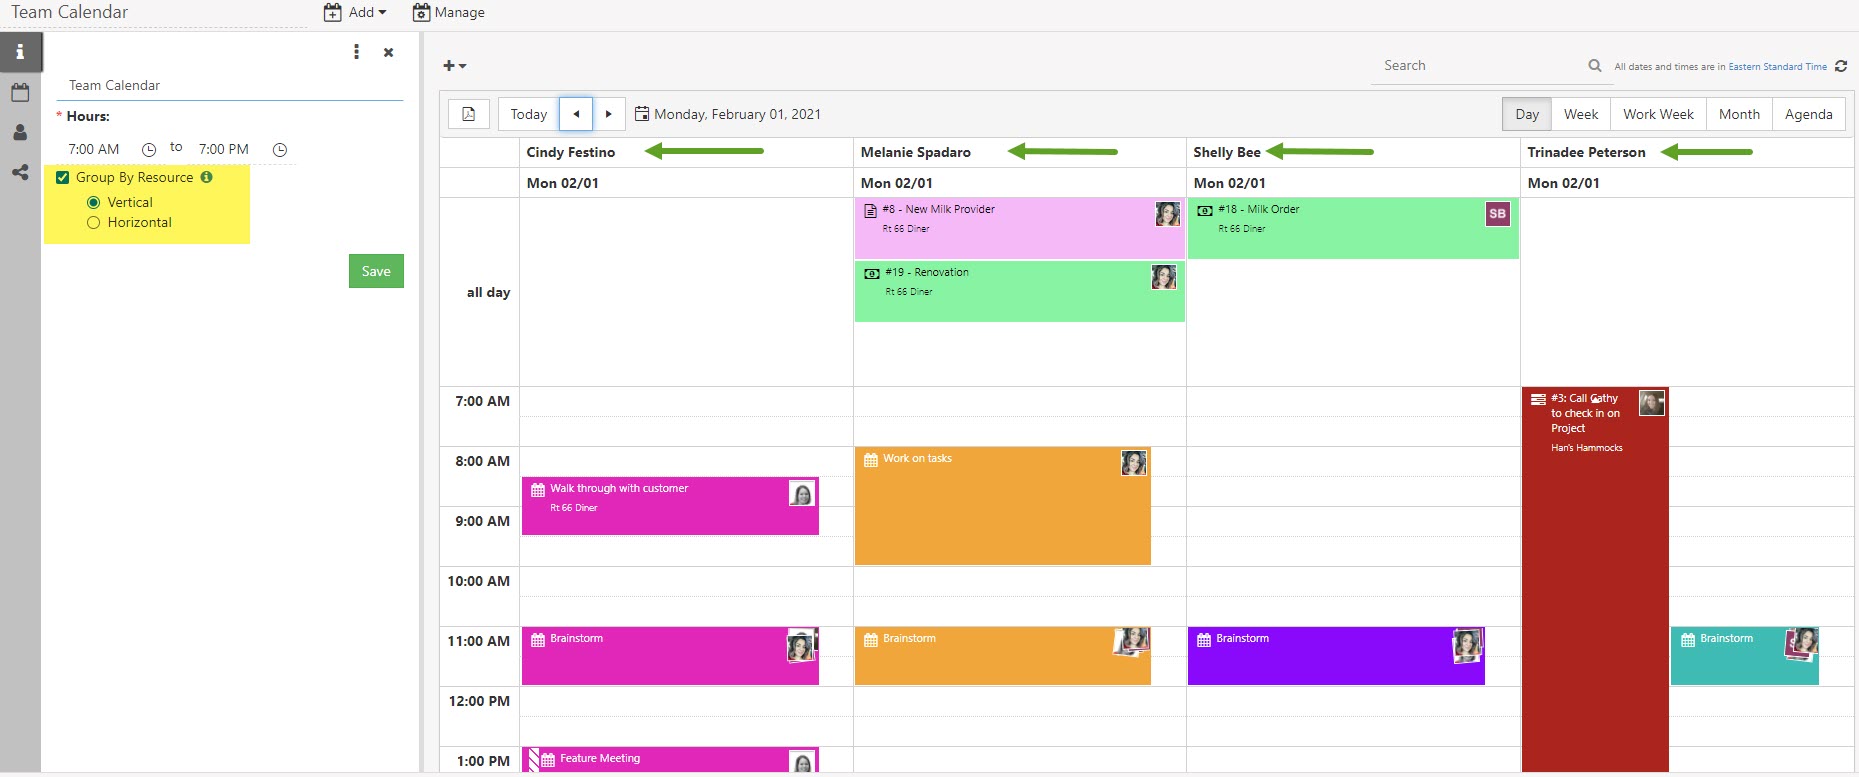 Calendar displaying grouped by resource